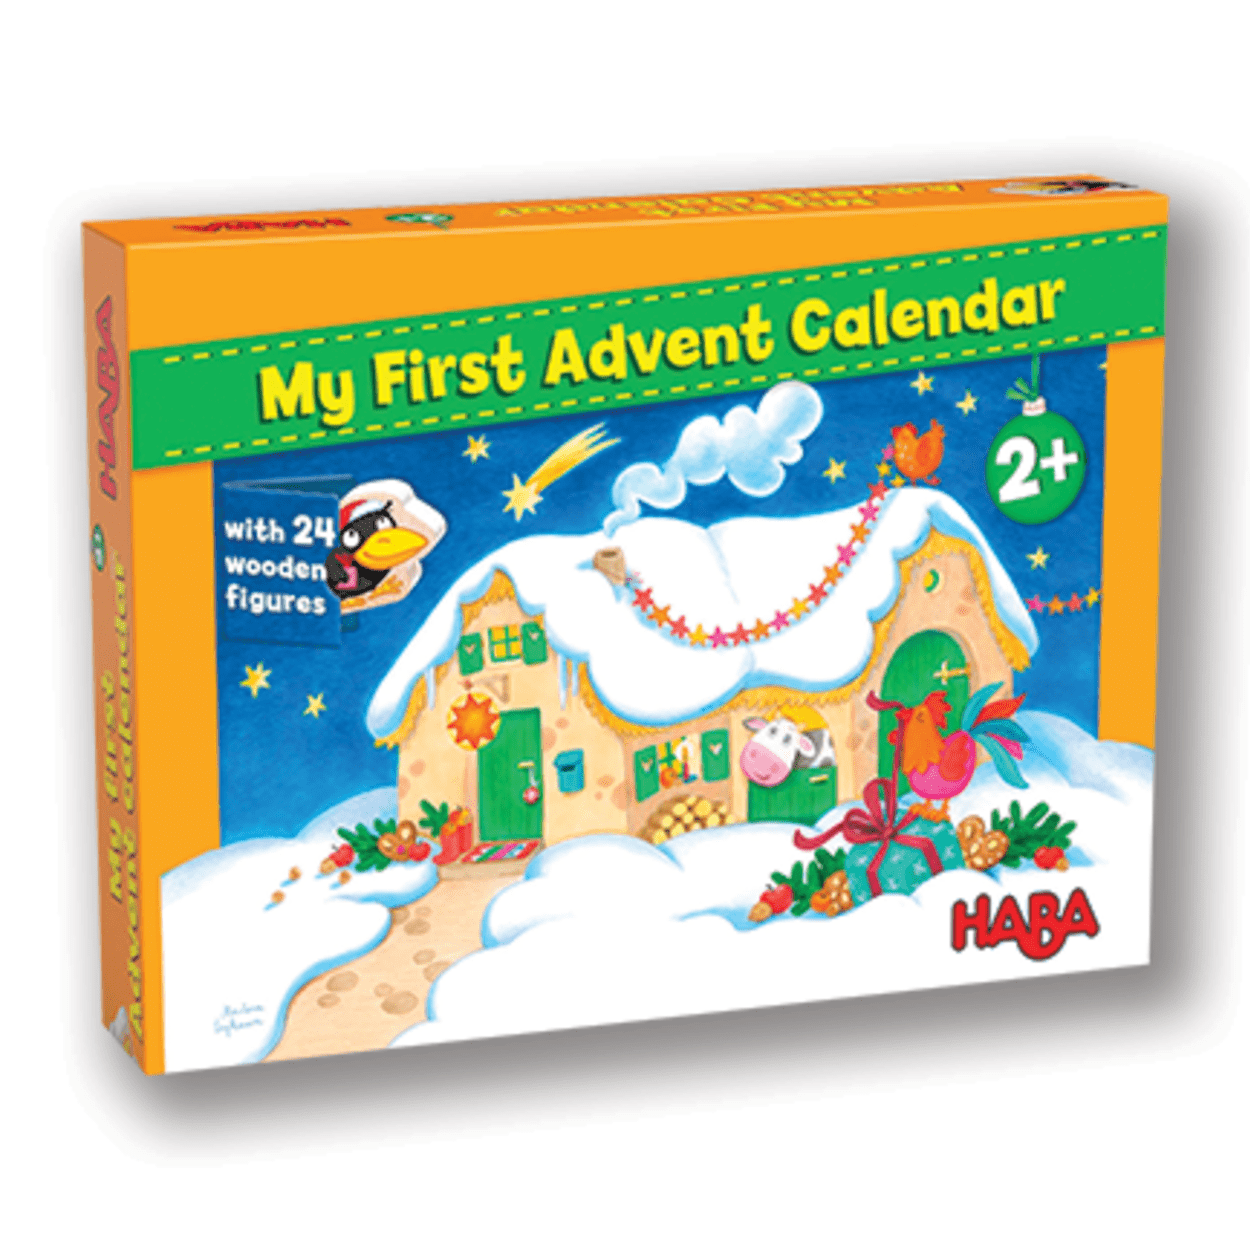 Haba : My First Advent Calendar The Board Game Hut